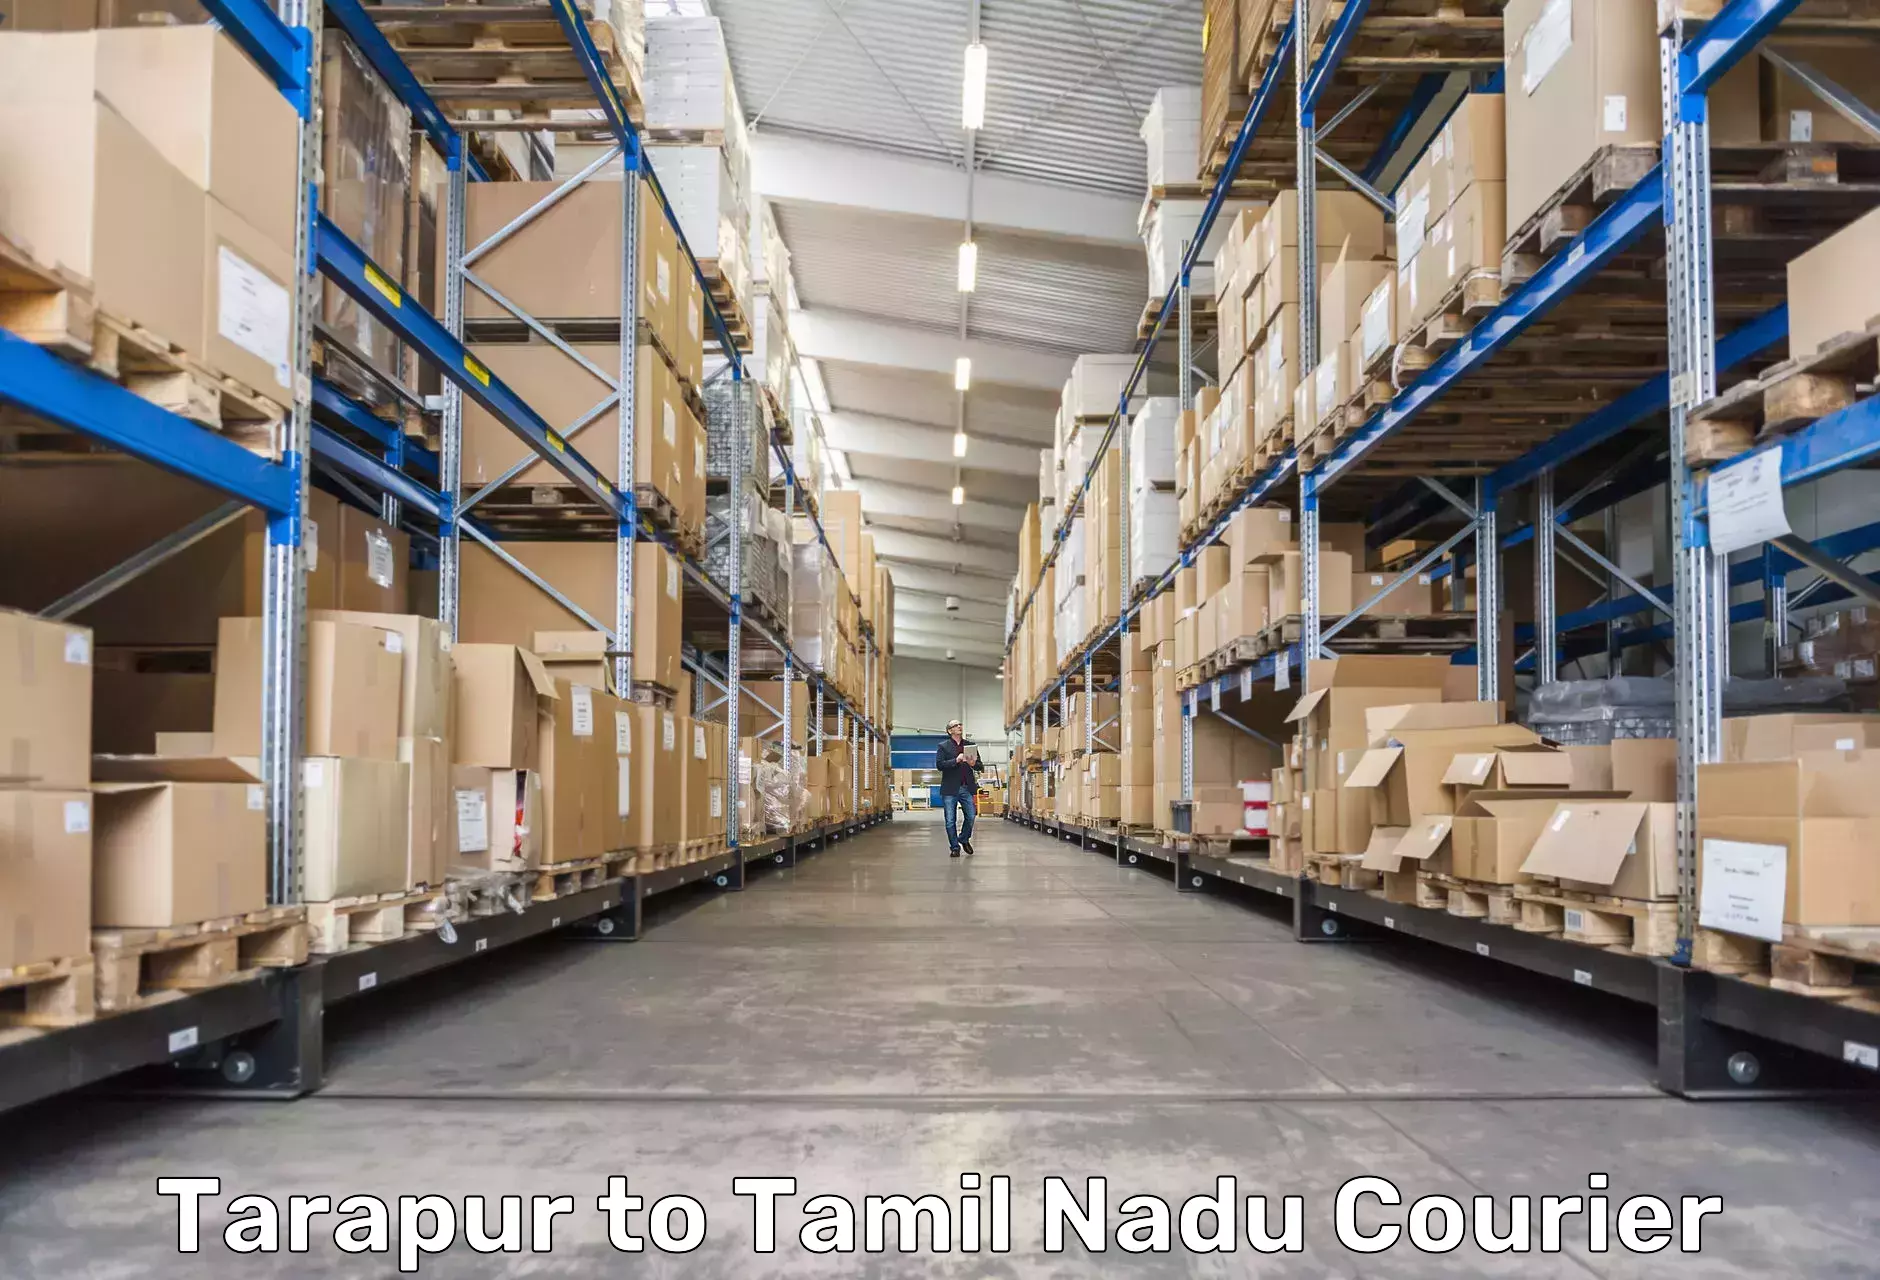 24-hour delivery options Tarapur to Tamil Nadu